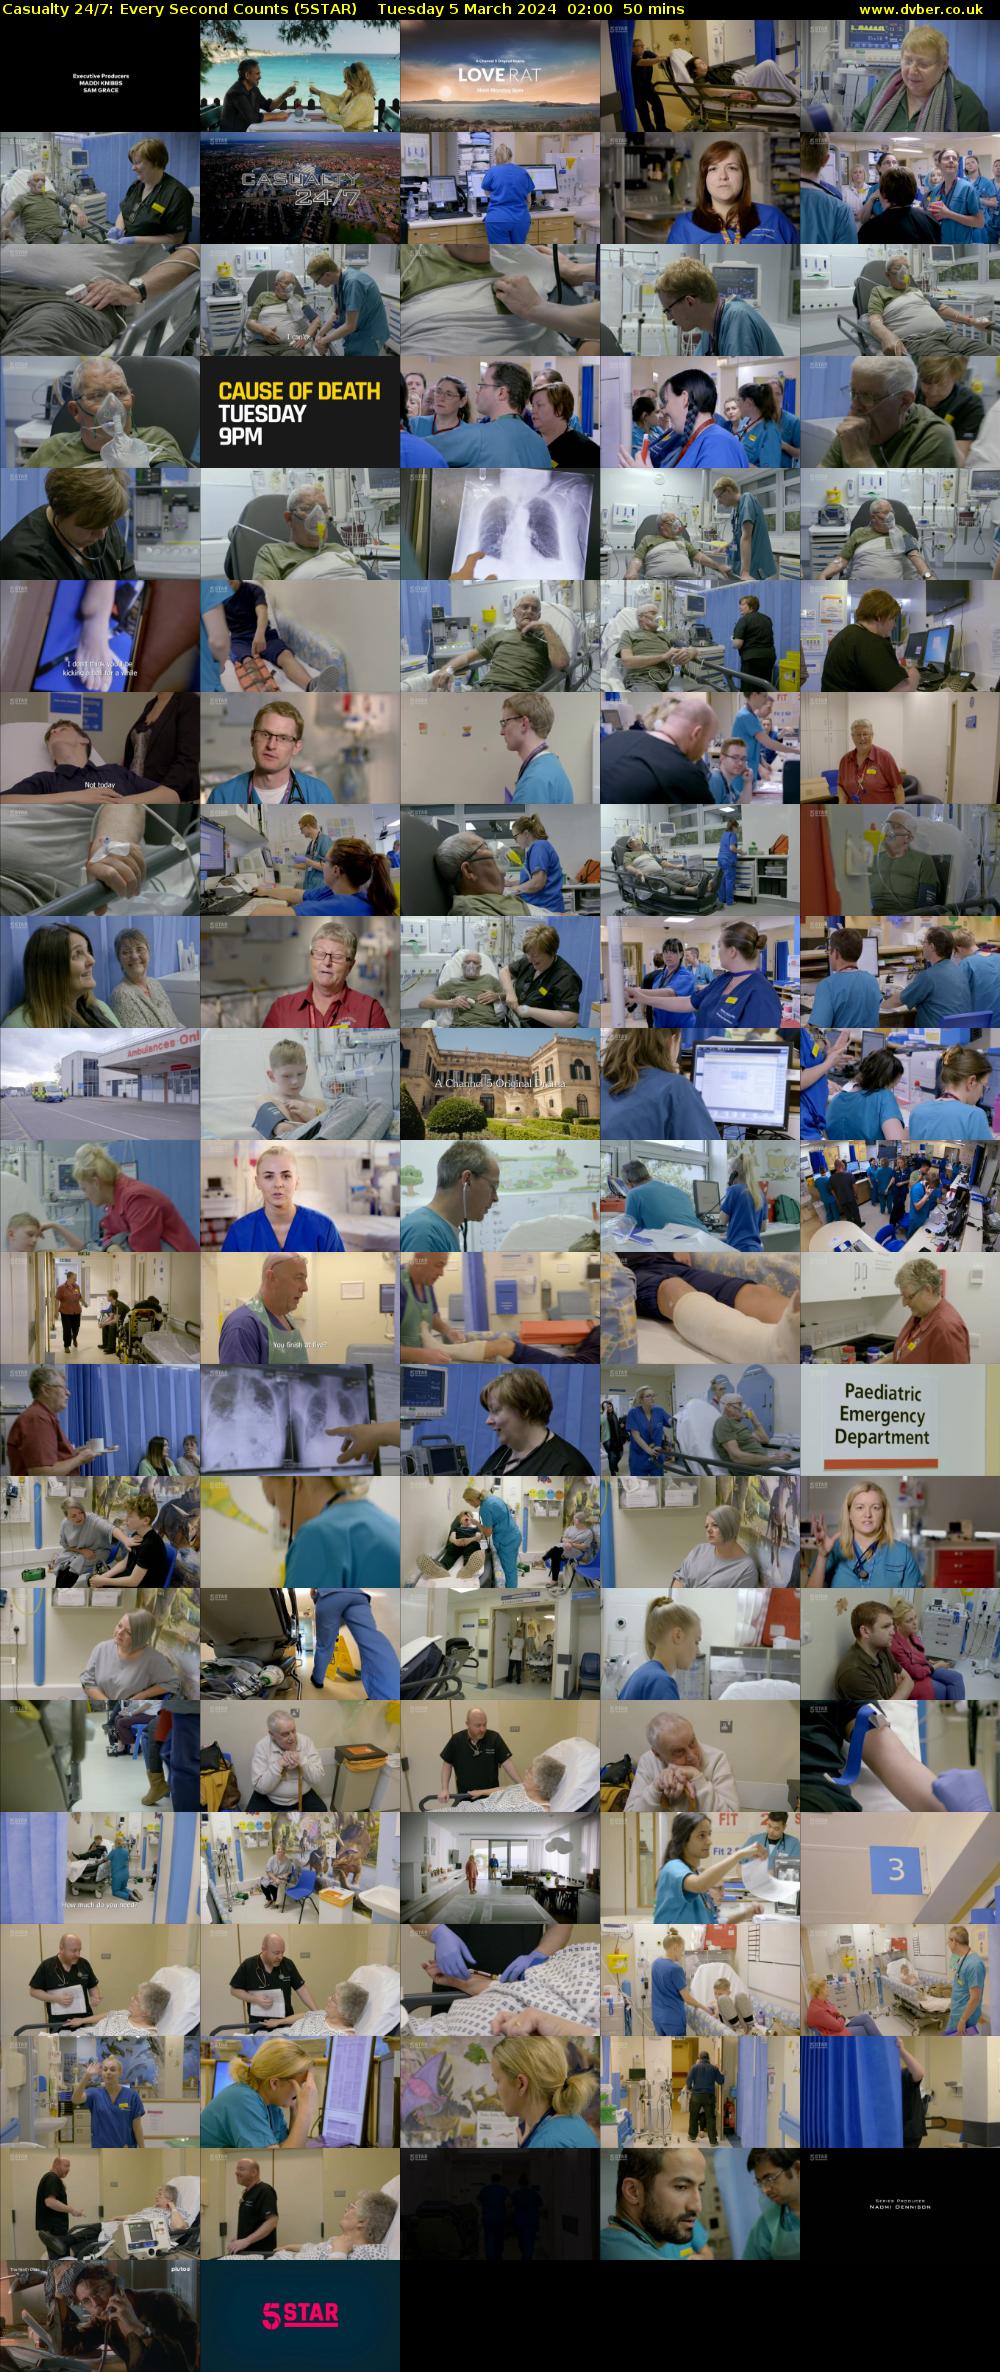 Casualty 24/7: Every Second Counts (5STAR) Tuesday 5 March 2024 02:00 - 02:50